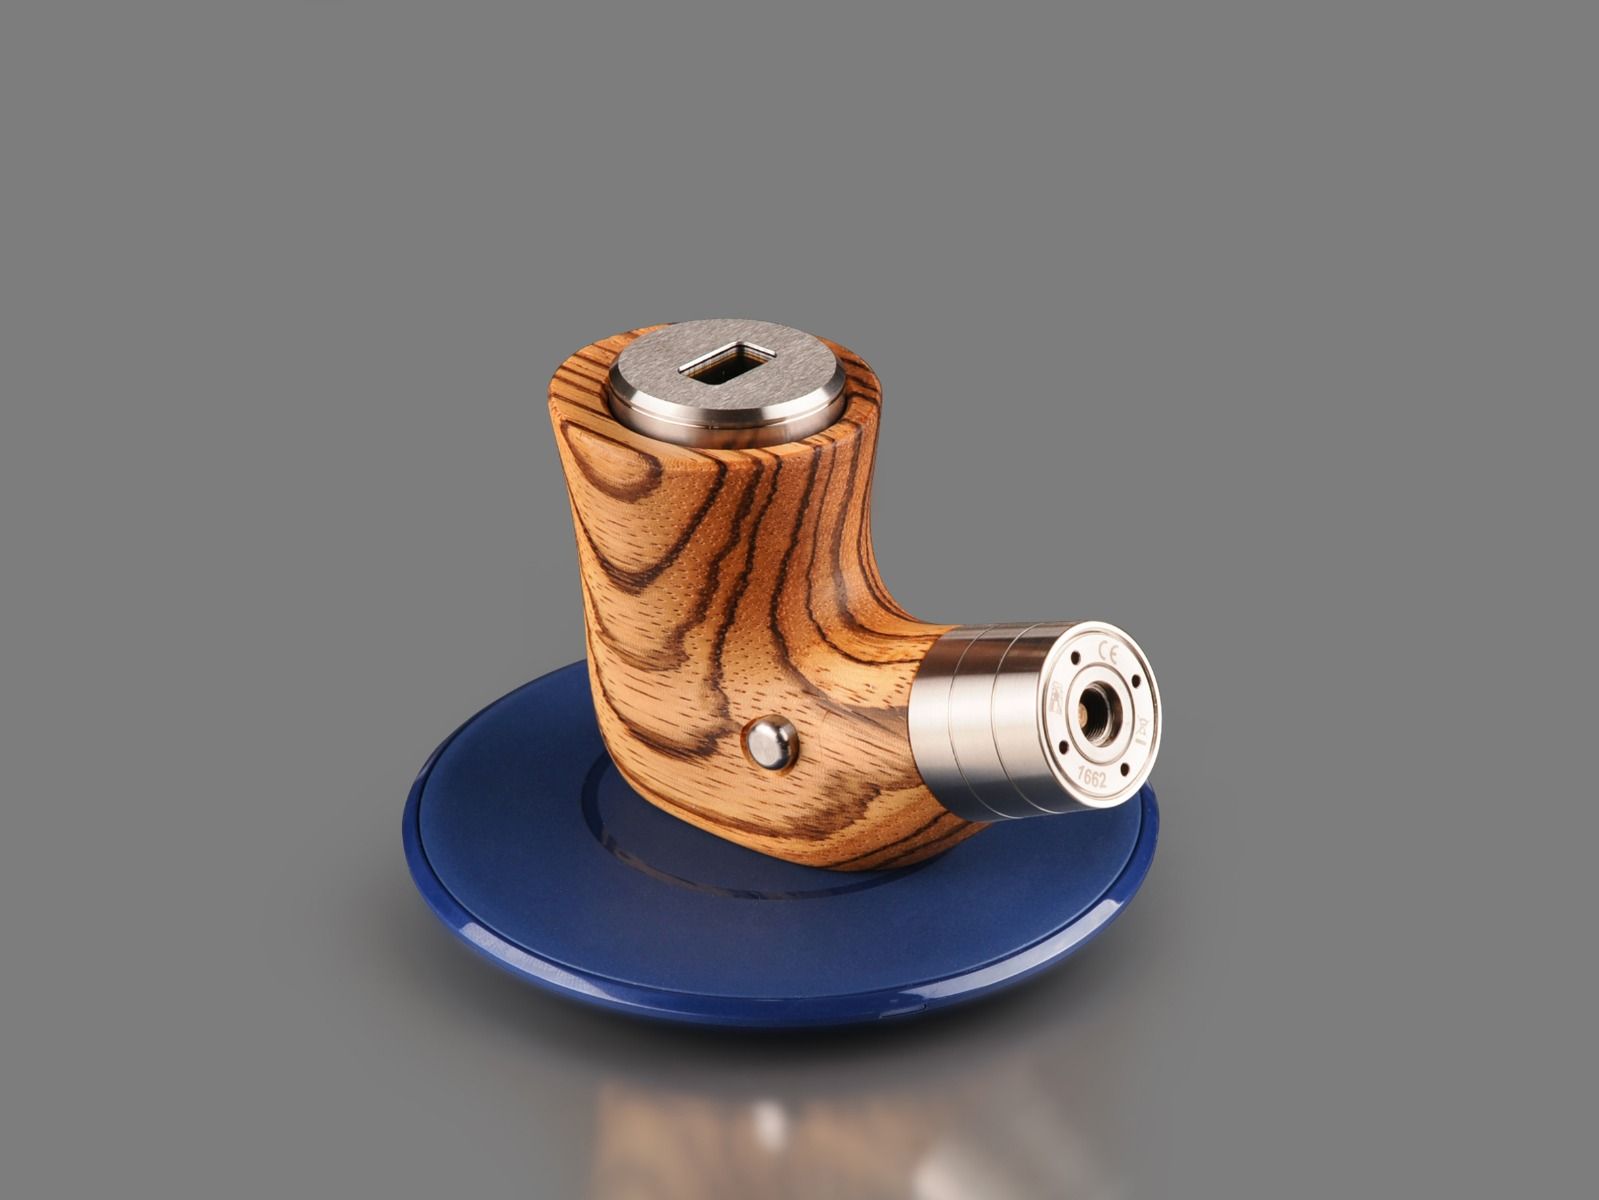 Yogs E-PIPE one powered by dicodes